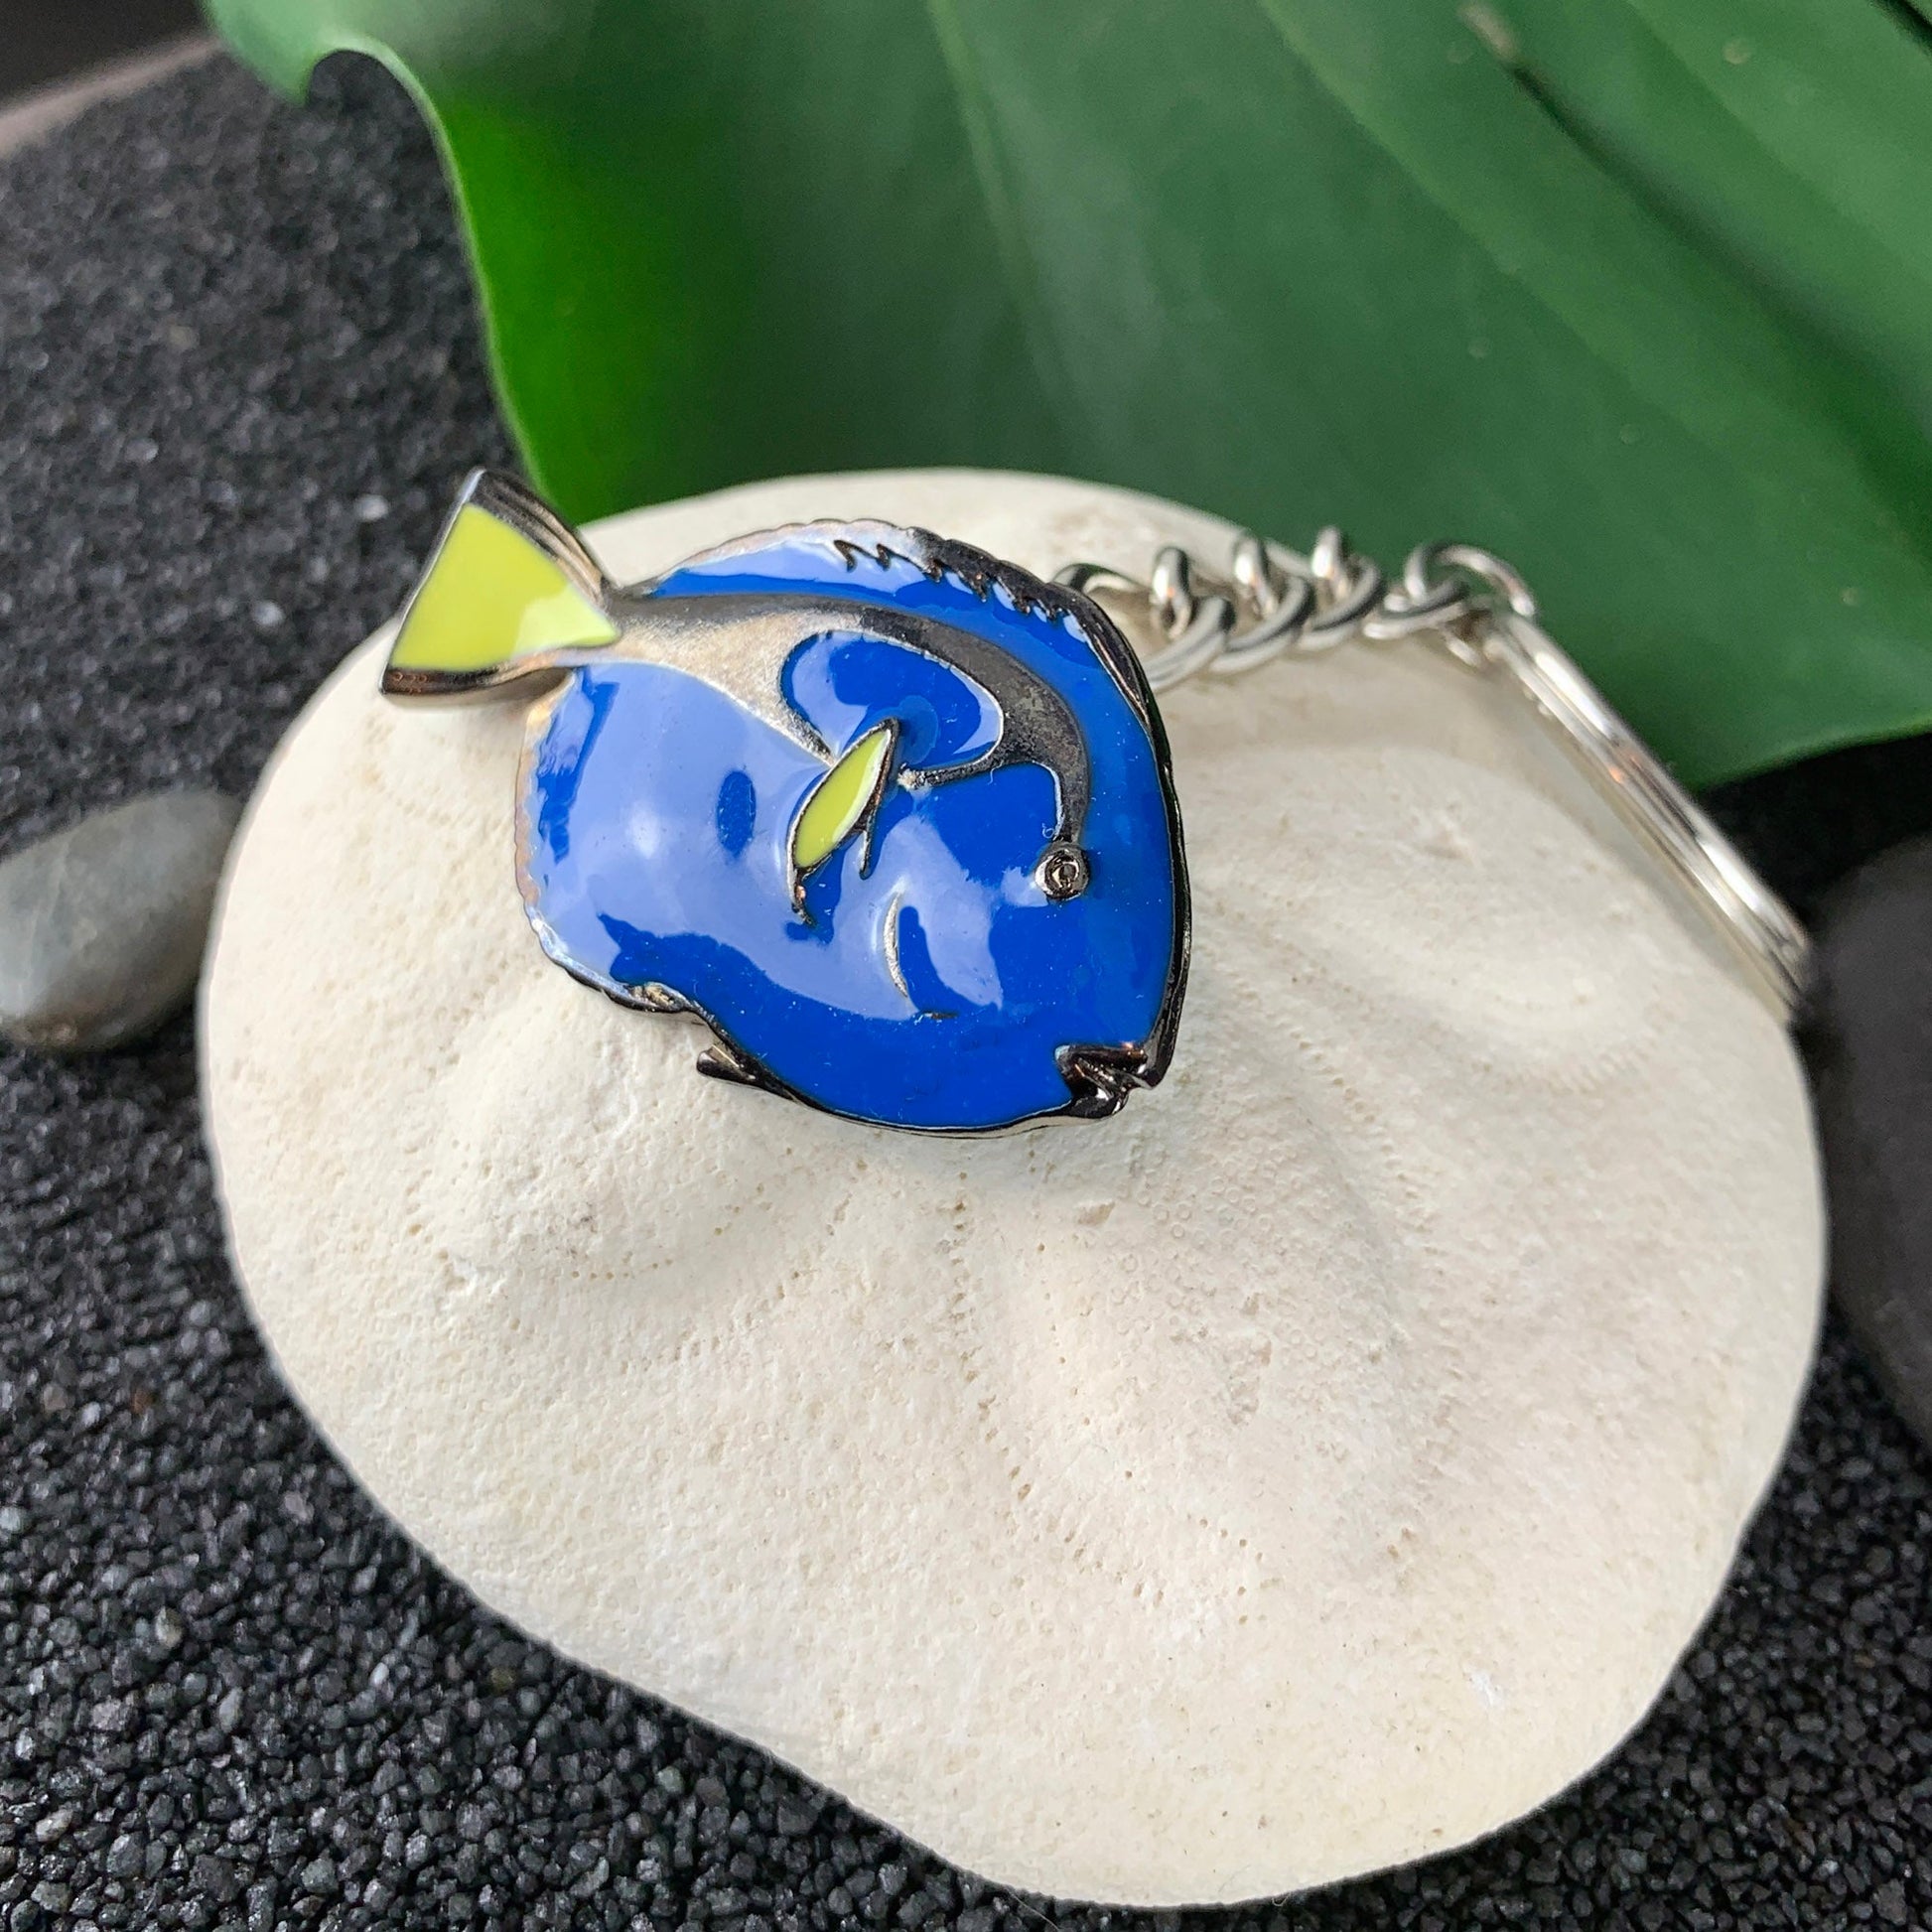 Blue Tang Keychain for Women and Teens-Key Chain Gifts, Blue Tang Key Ring, Blue Tang Charm, Gift for Ocean Lover, Pewter Keychain - The Tool Store